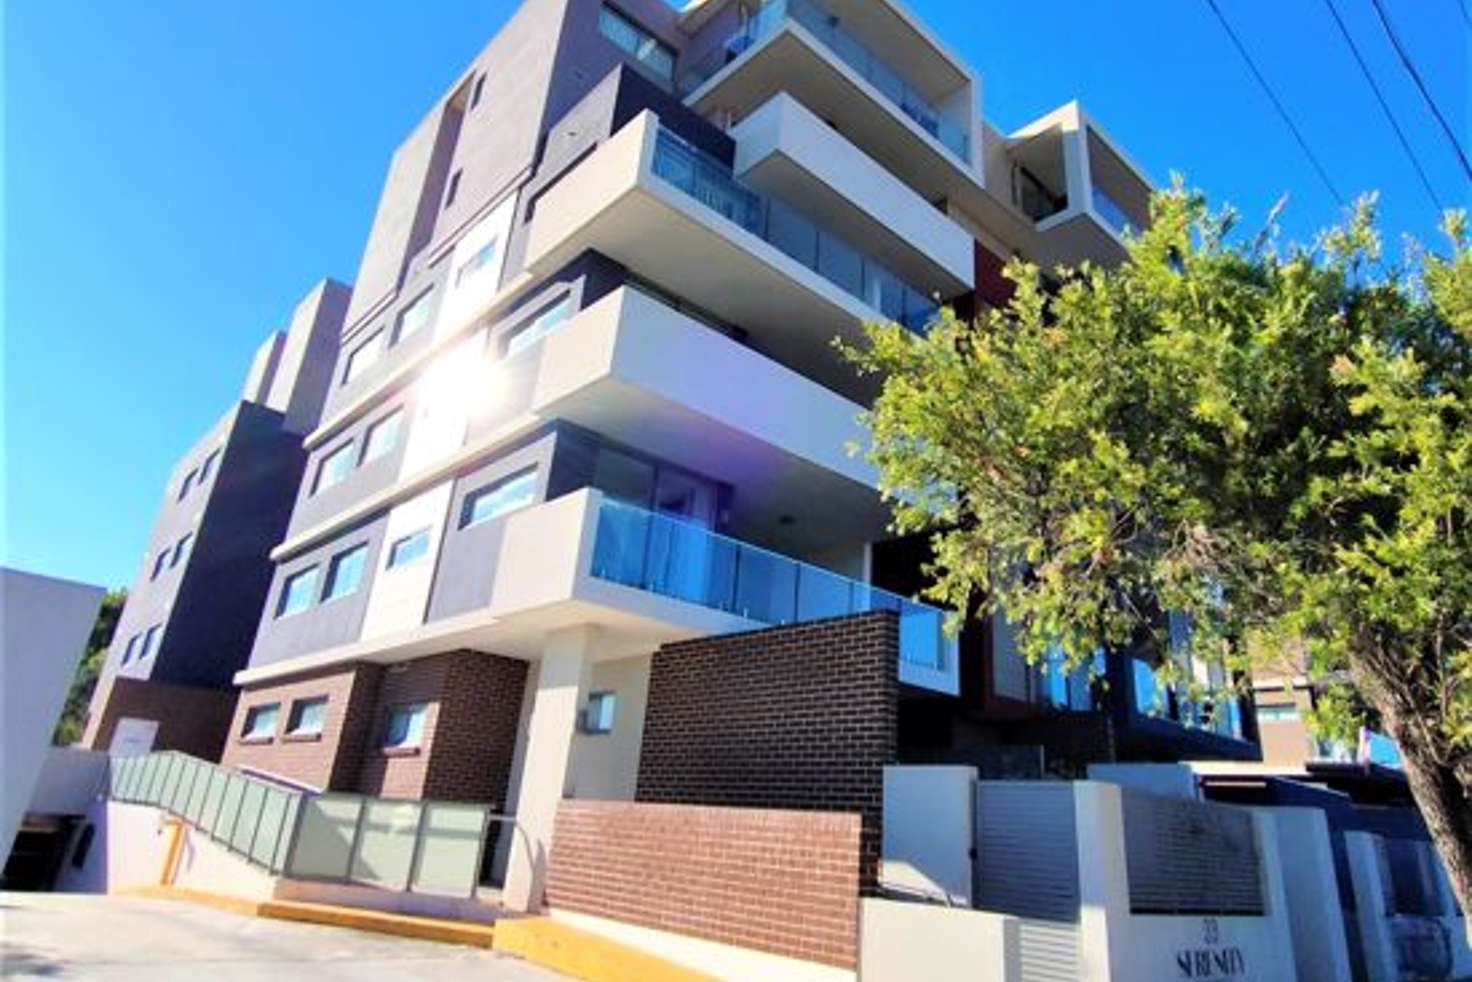 Main view of Homely apartment listing, 5/33 Percy street Bankstown, Bankstown NSW 2200